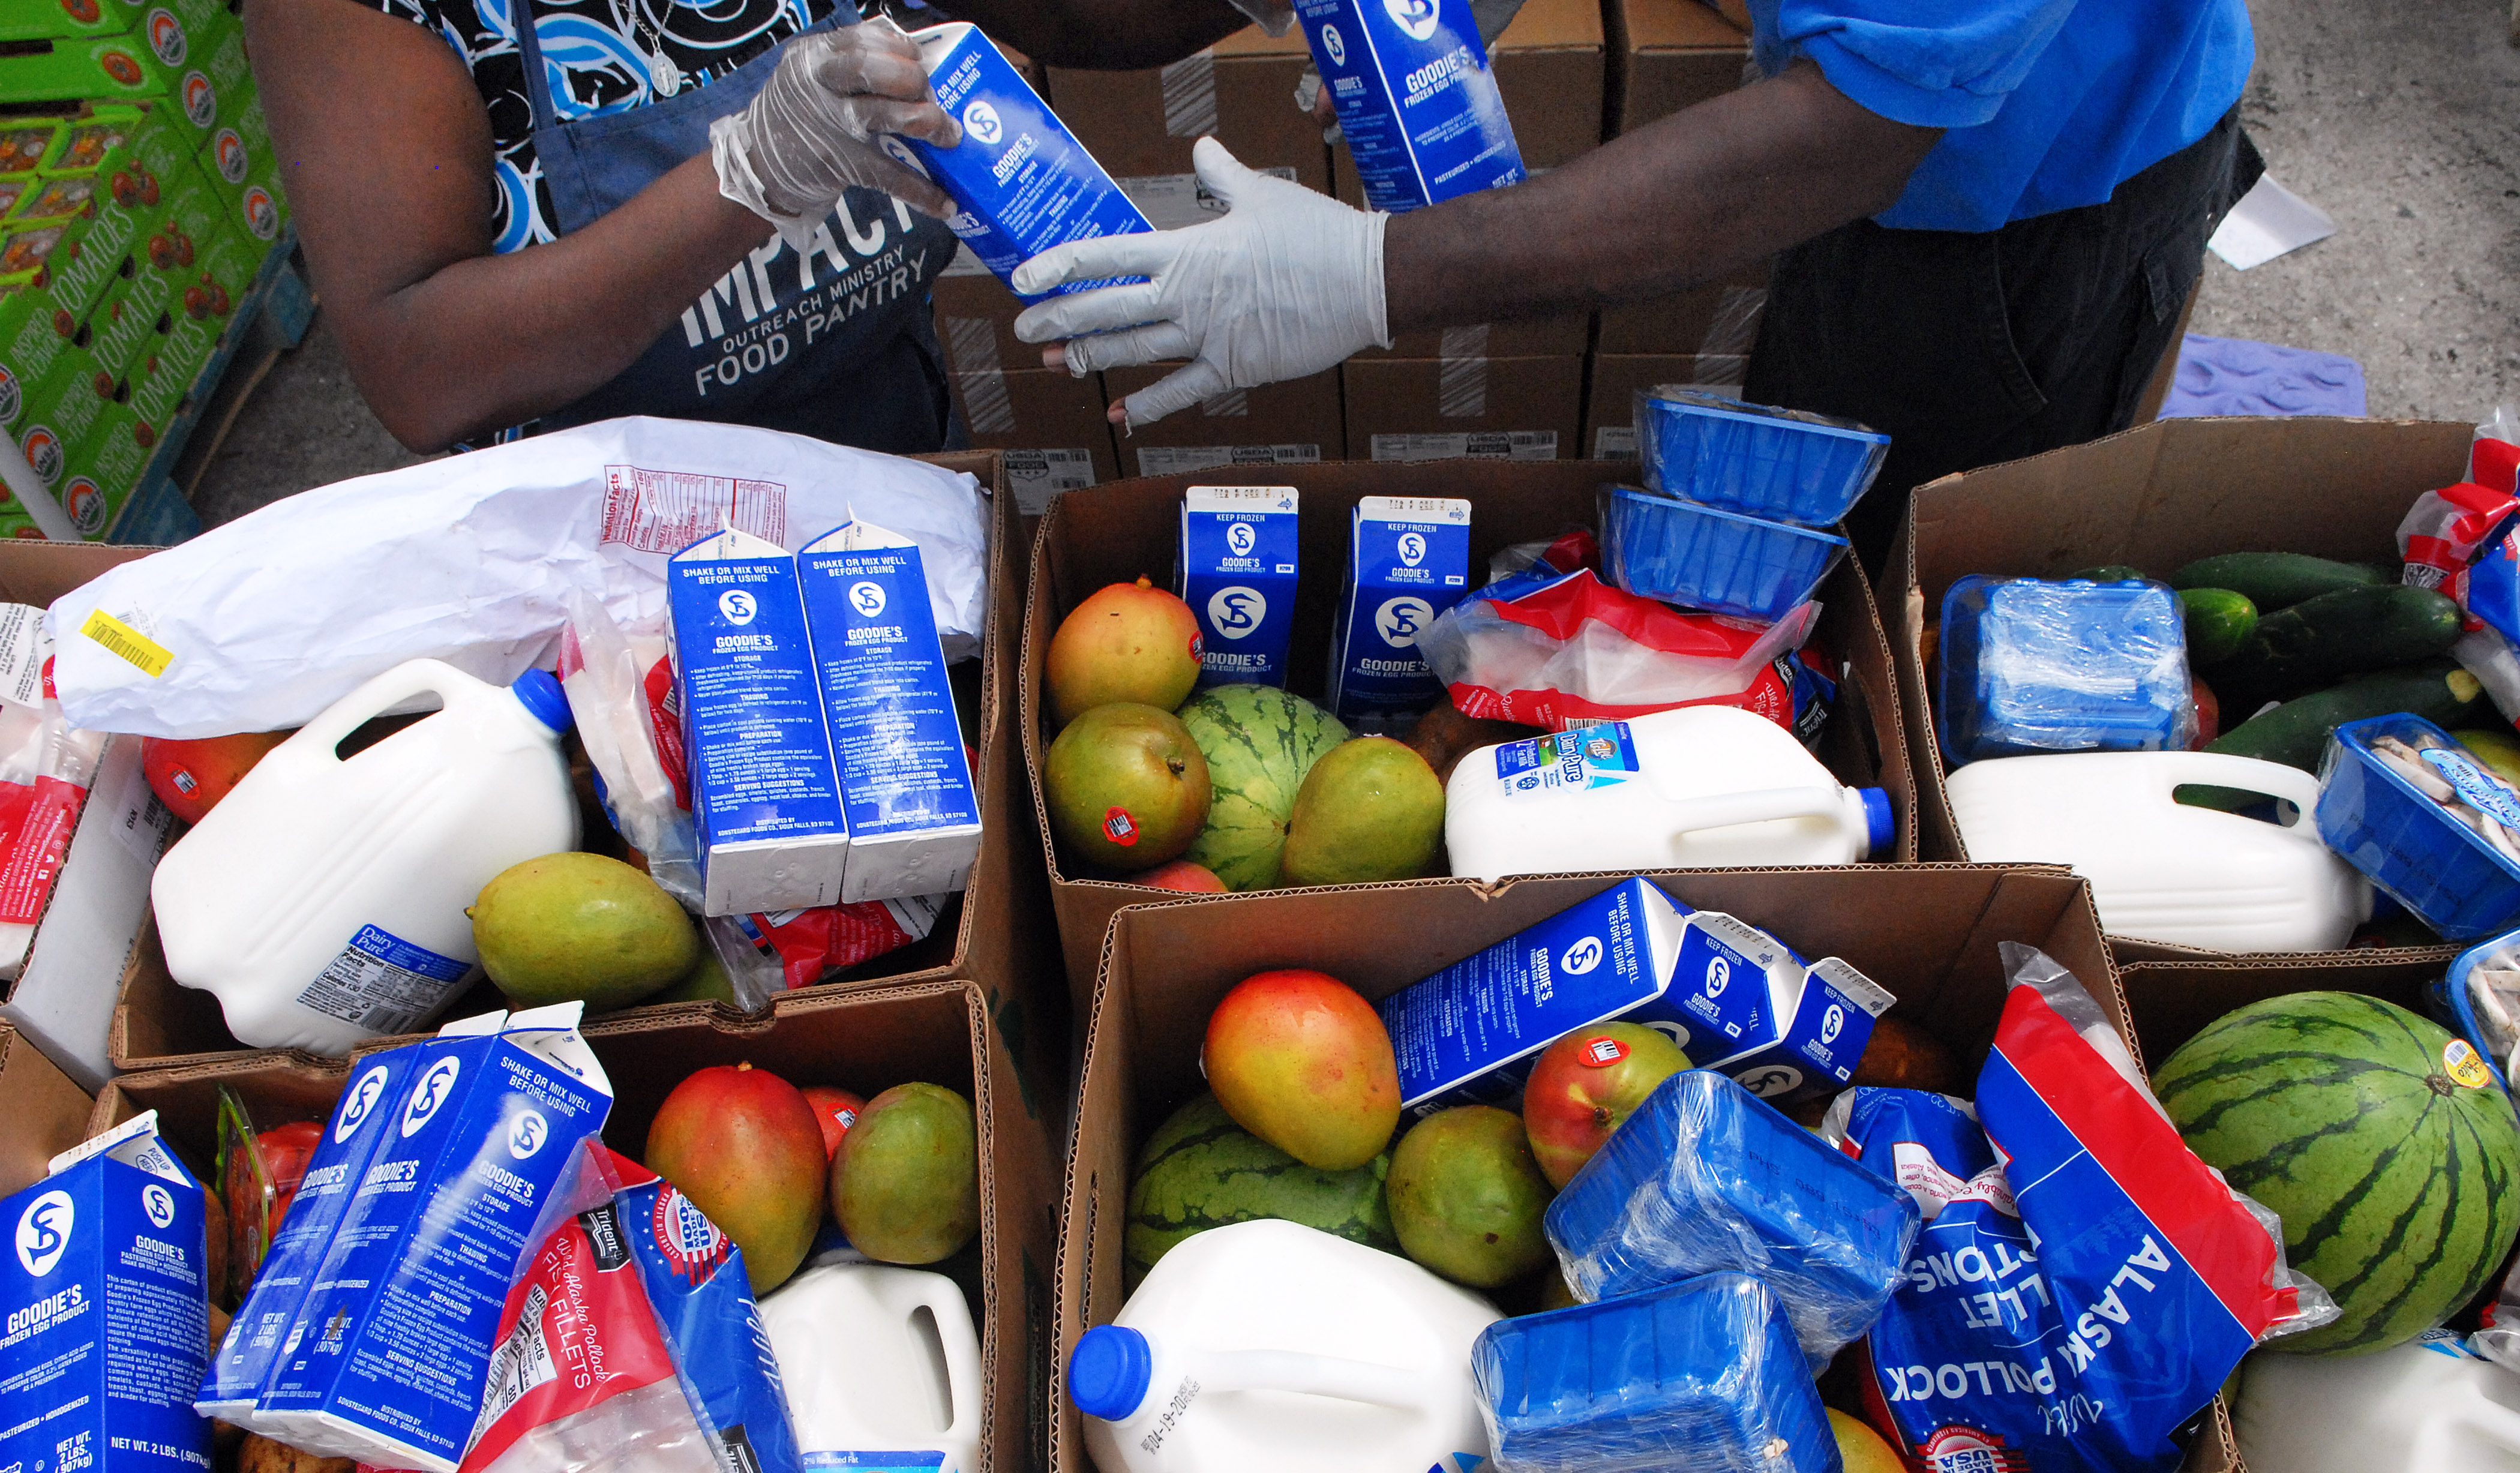 Workers fill boxes of food from the Second Harvest Food Bank of Central Florida to be distributed to needy families on April 6, 2020 in Orlando, Florida.